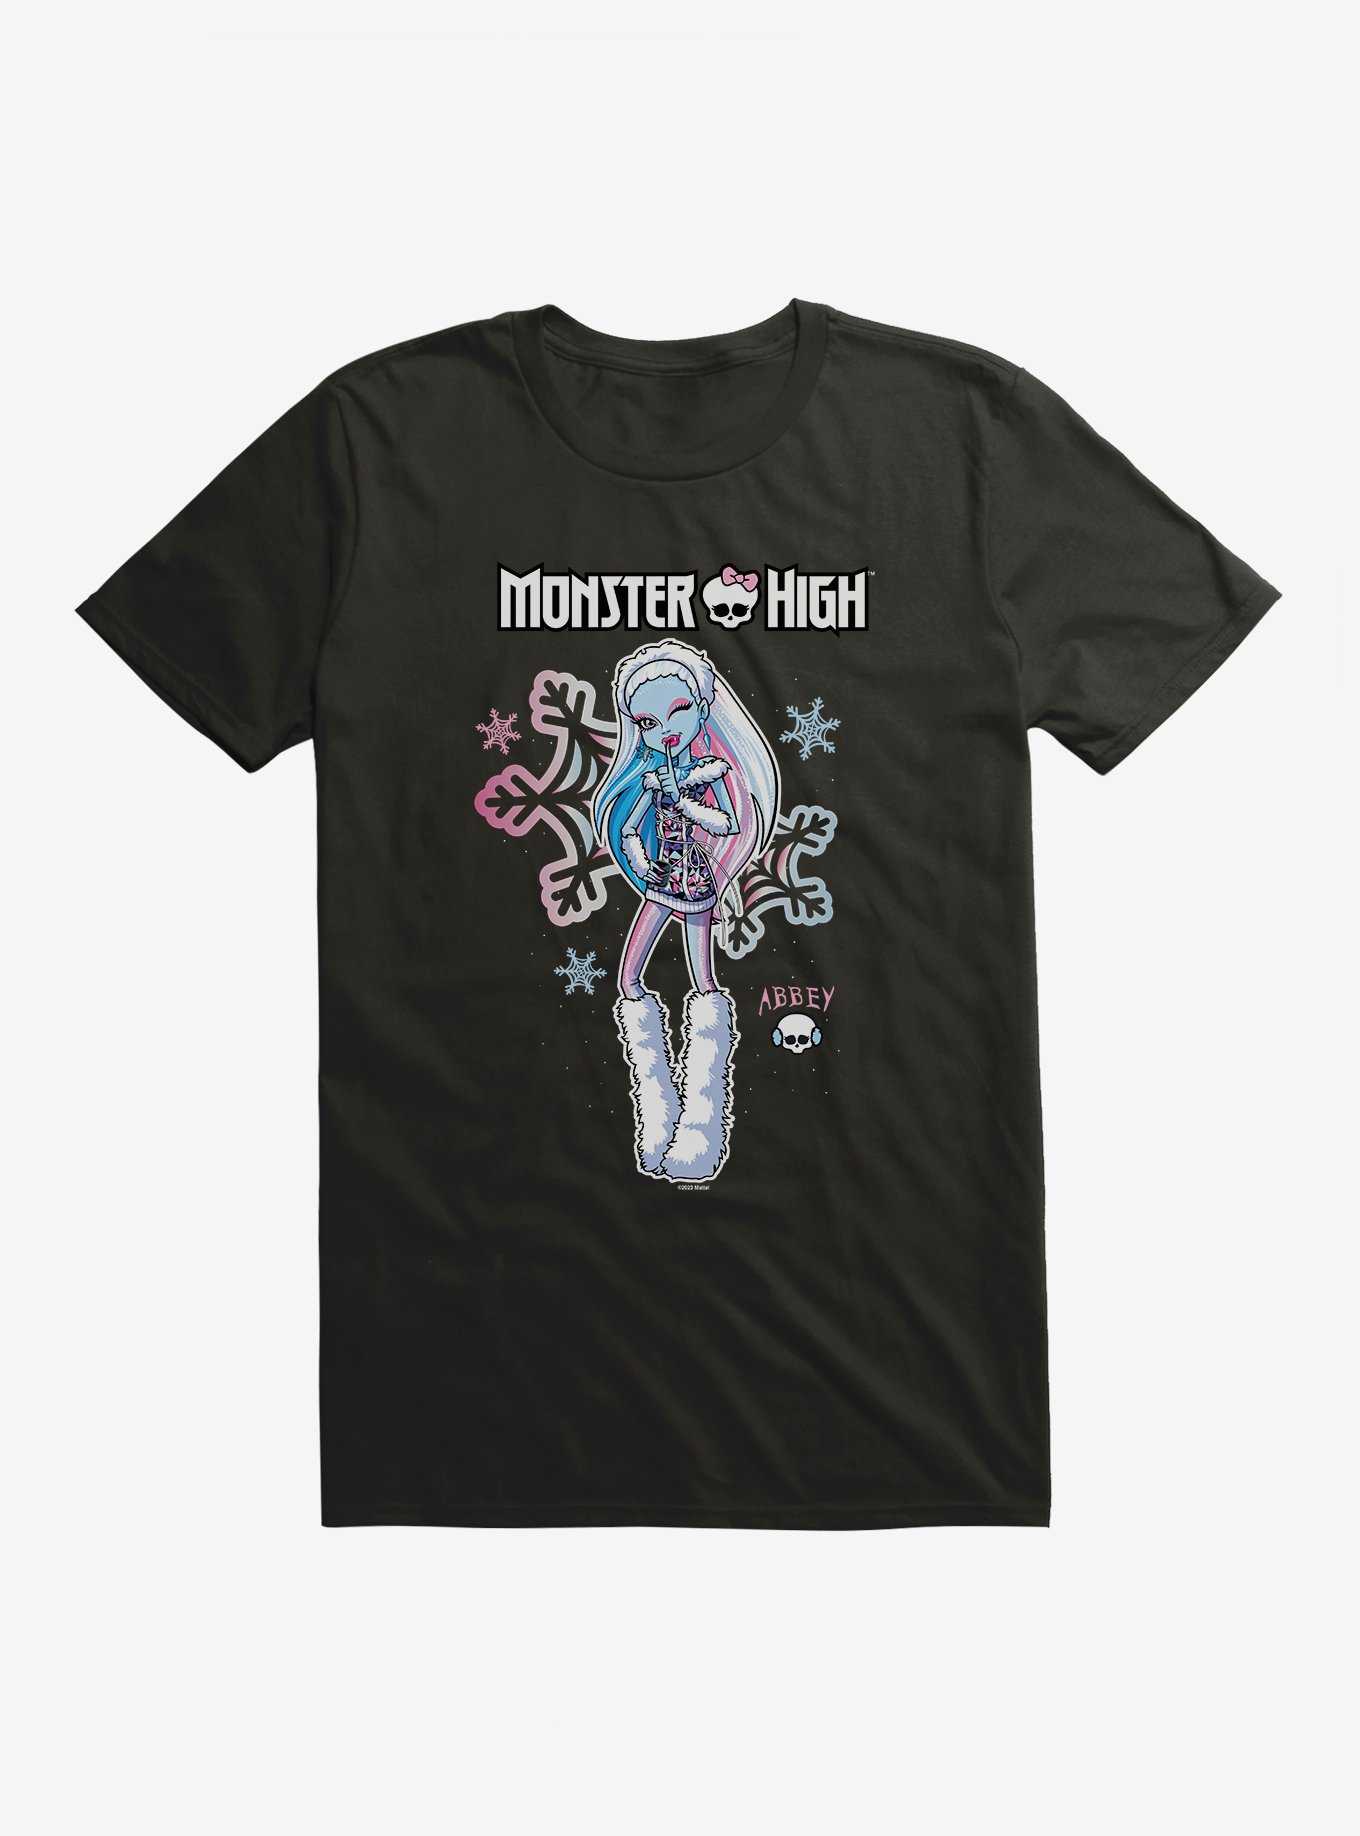 Monster High Abbey Bominable T-Shirt, , hi-res